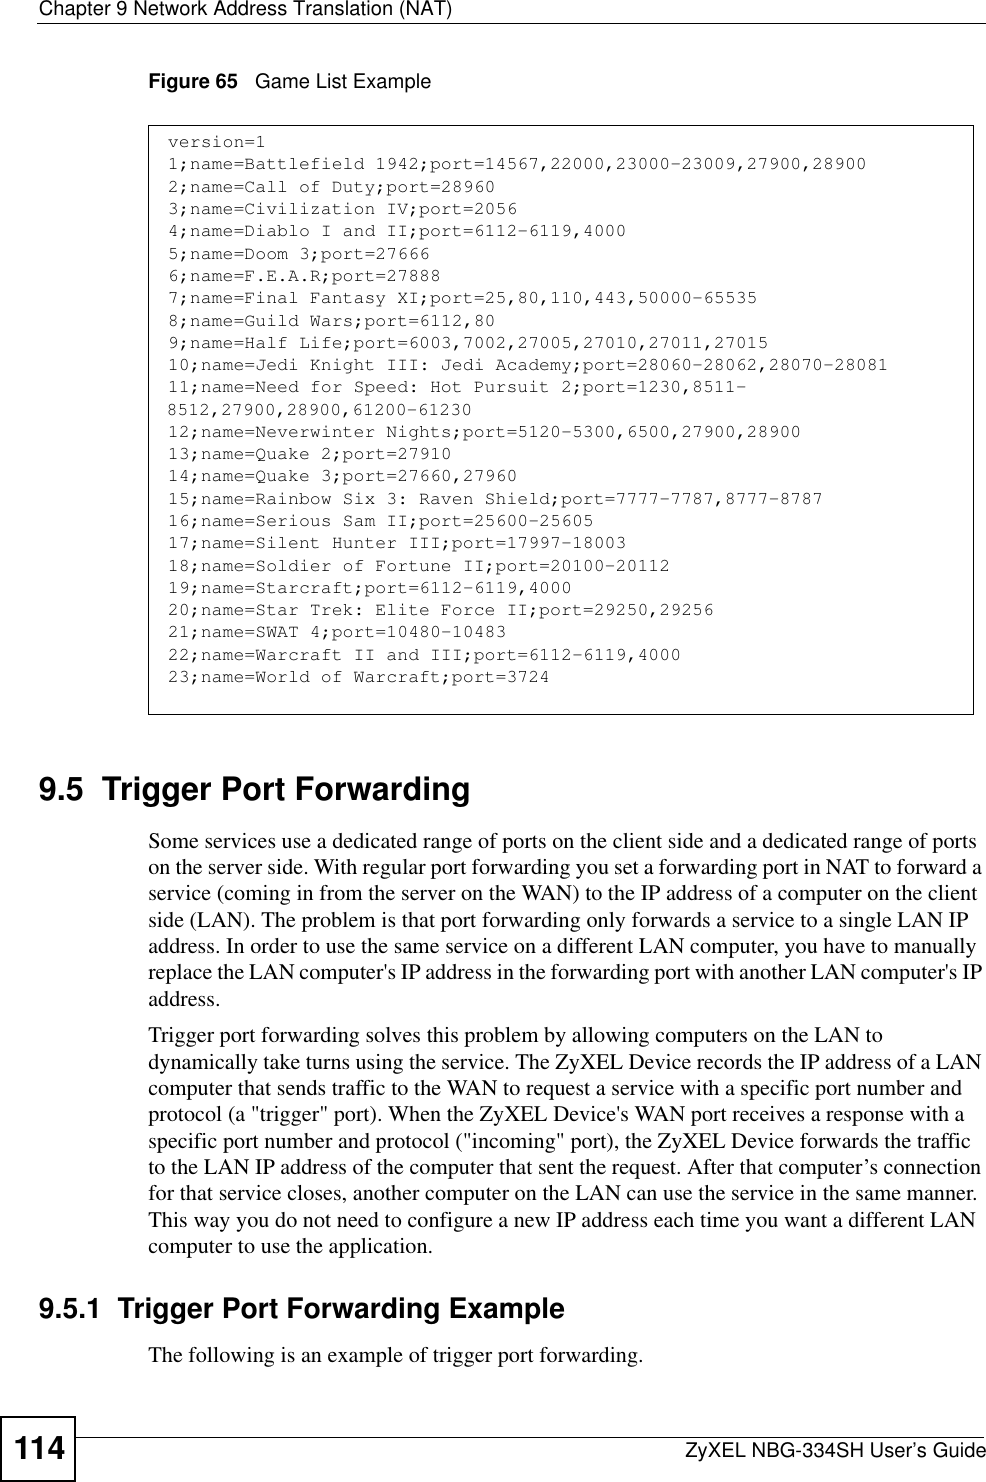 Chapter 9 Network Address Translation (NAT)ZyXEL NBG-334SH User’s Guide114Figure 65   Game List Example9.5  Trigger Port Forwarding  Some services use a dedicated range of ports on the client side and a dedicated range of ports on the server side. With regular port forwarding you set a forwarding port in NAT to forward a service (coming in from the server on the WAN) to the IP address of a computer on the client side (LAN). The problem is that port forwarding only forwards a service to a single LAN IP address. In order to use the same service on a different LAN computer, you have to manually replace the LAN computer&apos;s IP address in the forwarding port with another LAN computer&apos;s IP address. Trigger port forwarding solves this problem by allowing computers on the LAN to dynamically take turns using the service. The ZyXEL Device records the IP address of a LAN computer that sends traffic to the WAN to request a service with a specific port number and protocol (a &quot;trigger&quot; port). When the ZyXEL Device&apos;s WAN port receives a response with a specific port number and protocol (&quot;incoming&quot; port), the ZyXEL Device forwards the traffic to the LAN IP address of the computer that sent the request. After that computer’s connection for that service closes, another computer on the LAN can use the service in the same manner. This way you do not need to configure a new IP address each time you want a different LAN computer to use the application.9.5.1  Trigger Port Forwarding ExampleThe following is an example of trigger port forwarding.version=11;name=Battlefield 1942;port=14567,22000,23000-23009,27900,289002;name=Call of Duty;port=289603;name=Civilization IV;port=20564;name=Diablo I and II;port=6112-6119,40005;name=Doom 3;port=276666;name=F.E.A.R;port=278887;name=Final Fantasy XI;port=25,80,110,443,50000-655358;name=Guild Wars;port=6112,809;name=Half Life;port=6003,7002,27005,27010,27011,2701510;name=Jedi Knight III: Jedi Academy;port=28060-28062,28070-2808111;name=Need for Speed: Hot Pursuit 2;port=1230,8511-8512,27900,28900,61200-6123012;name=Neverwinter Nights;port=5120-5300,6500,27900,2890013;name=Quake 2;port=2791014;name=Quake 3;port=27660,2796015;name=Rainbow Six 3: Raven Shield;port=7777-7787,8777-878716;name=Serious Sam II;port=25600-2560517;name=Silent Hunter III;port=17997-1800318;name=Soldier of Fortune II;port=20100-2011219;name=Starcraft;port=6112-6119,400020;name=Star Trek: Elite Force II;port=29250,2925621;name=SWAT 4;port=10480-1048322;name=Warcraft II and III;port=6112-6119,400023;name=World of Warcraft;port=3724